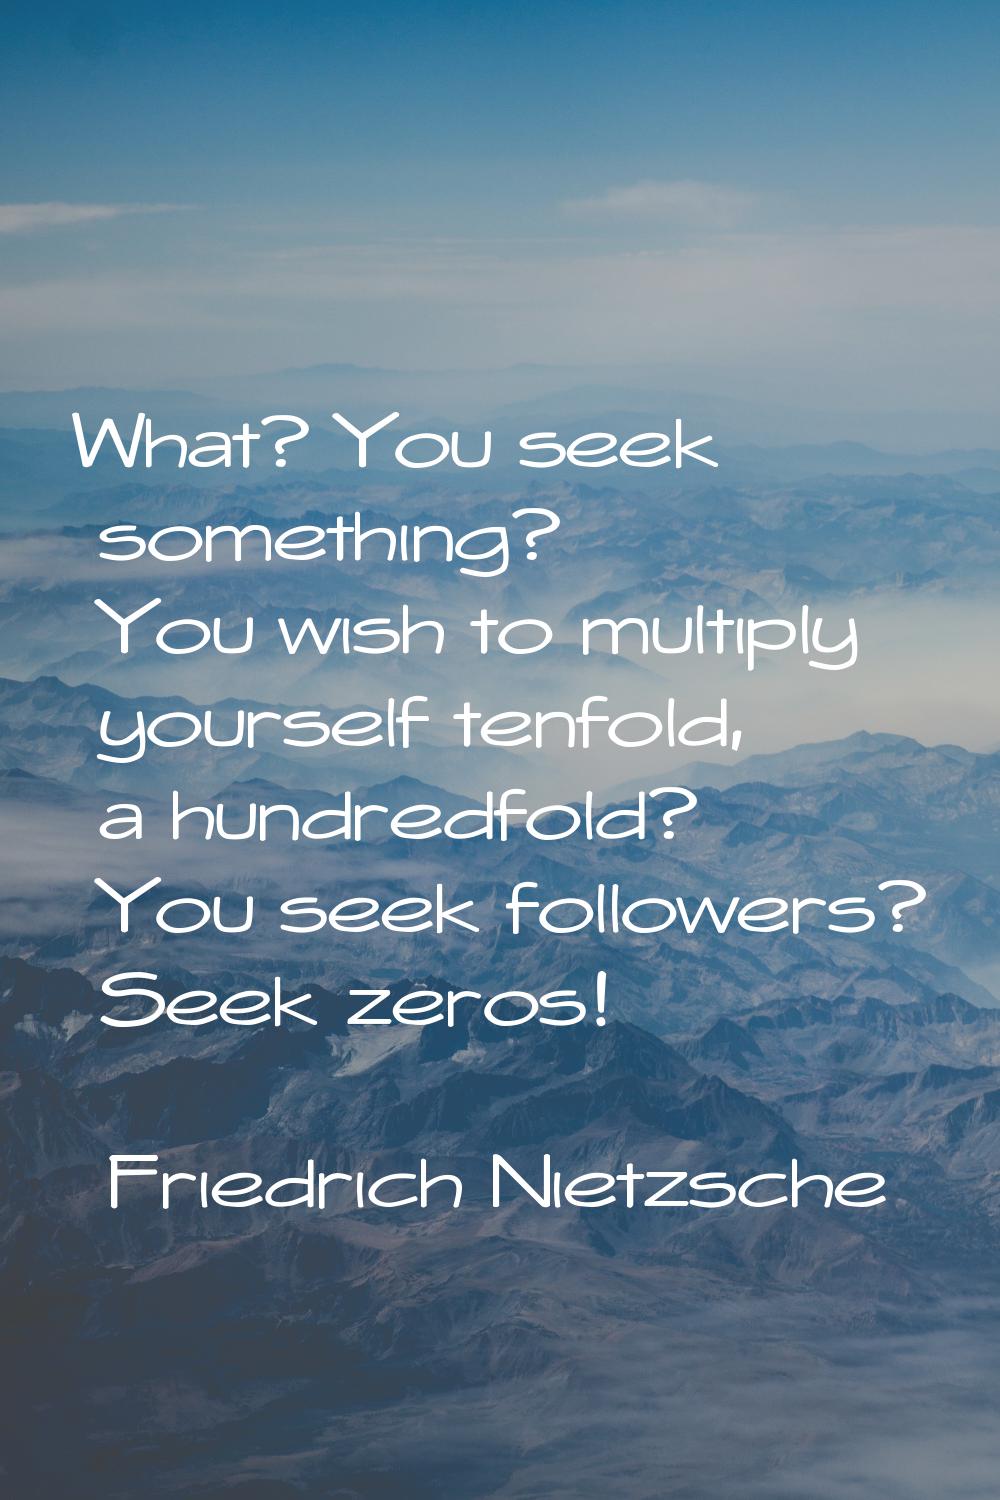 What? You seek something? You wish to multiply yourself tenfold, a hundredfold? You seek followers?